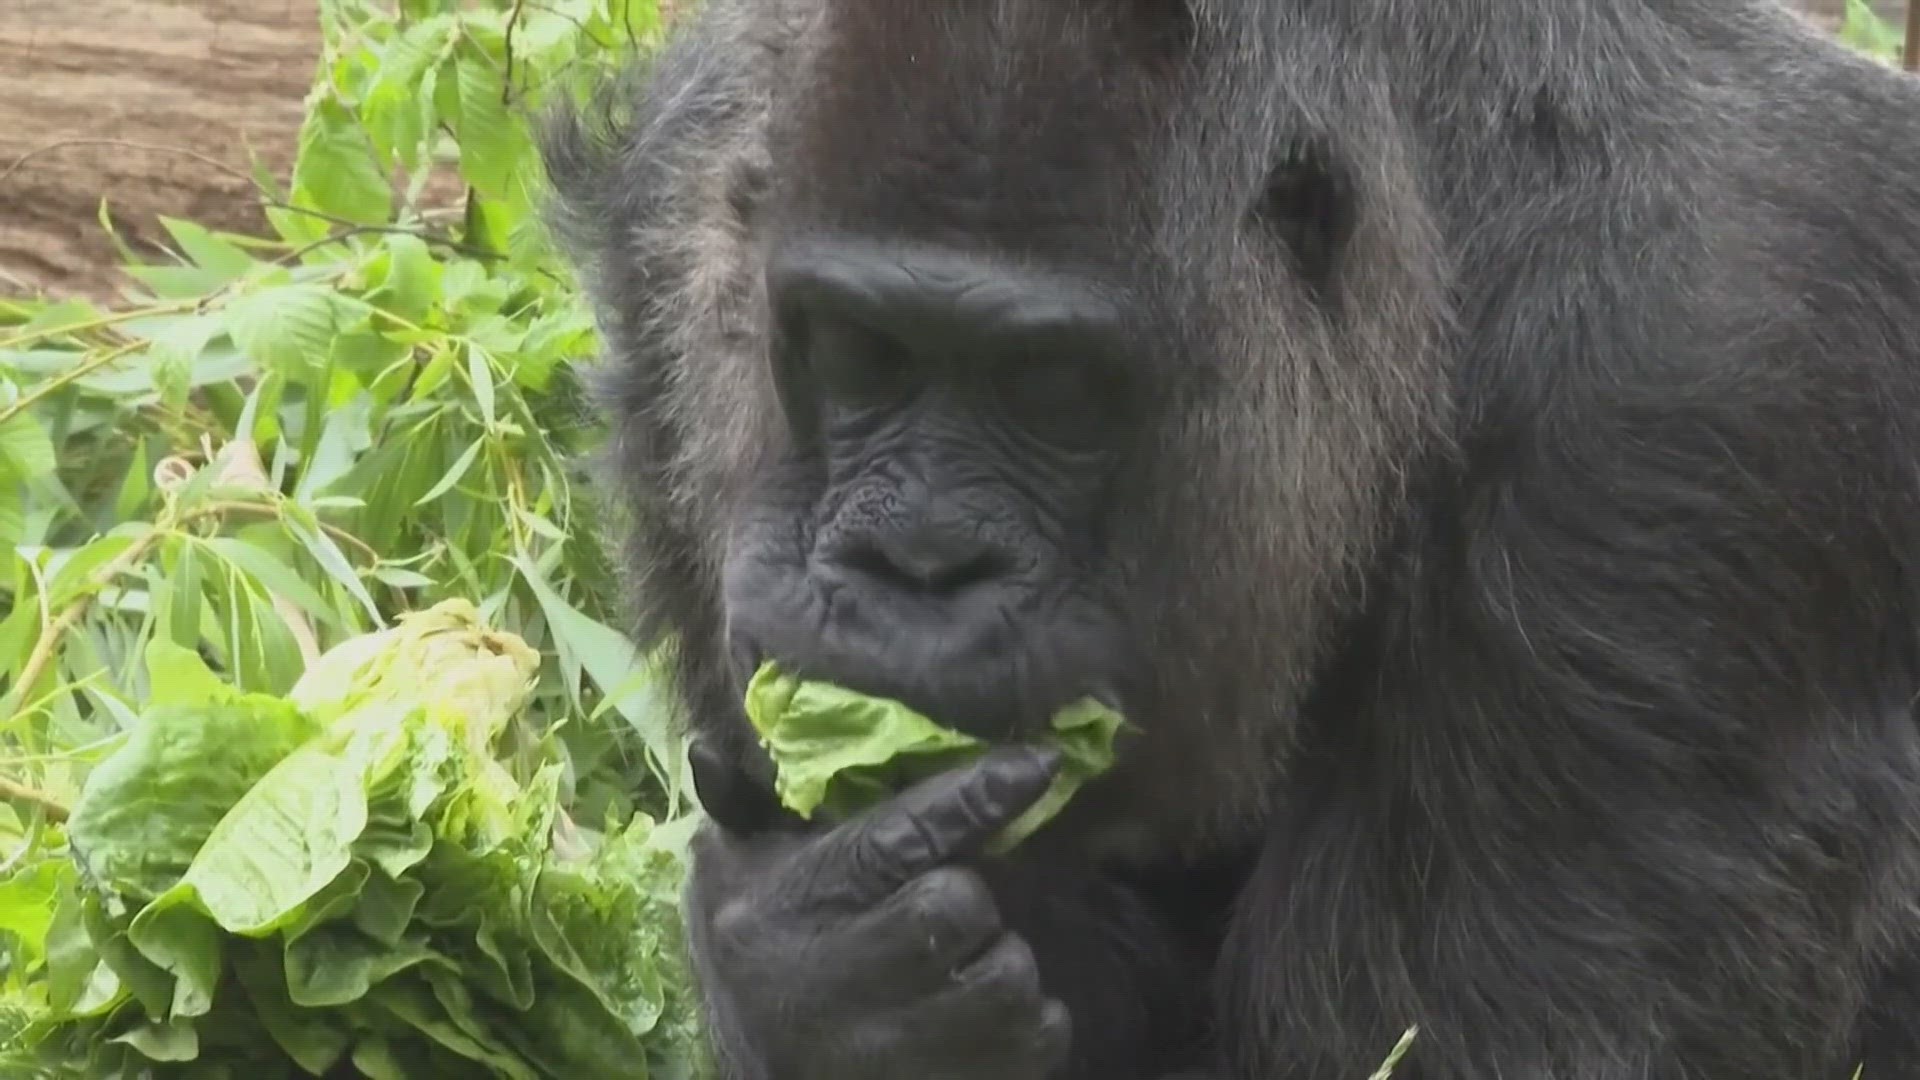 Fatou, a gorilla at a zoo in Berlin, turned 67, making her the oldest known living gorilla in the world.